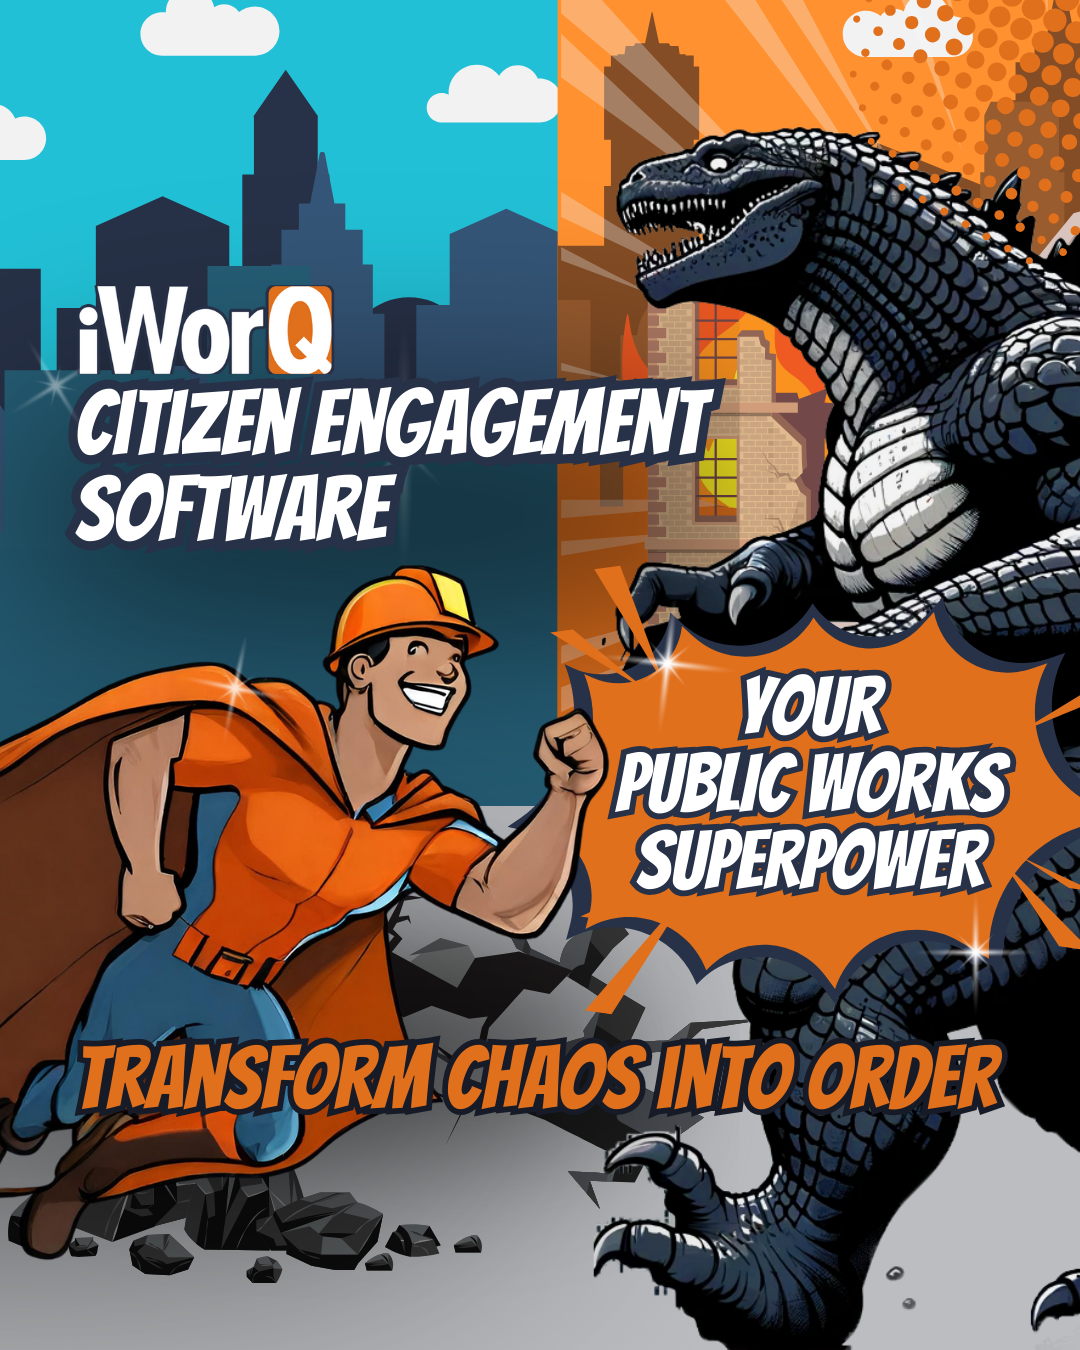 iWorQ Citizen Engagement software is your public works superpower to transform chaos into order!